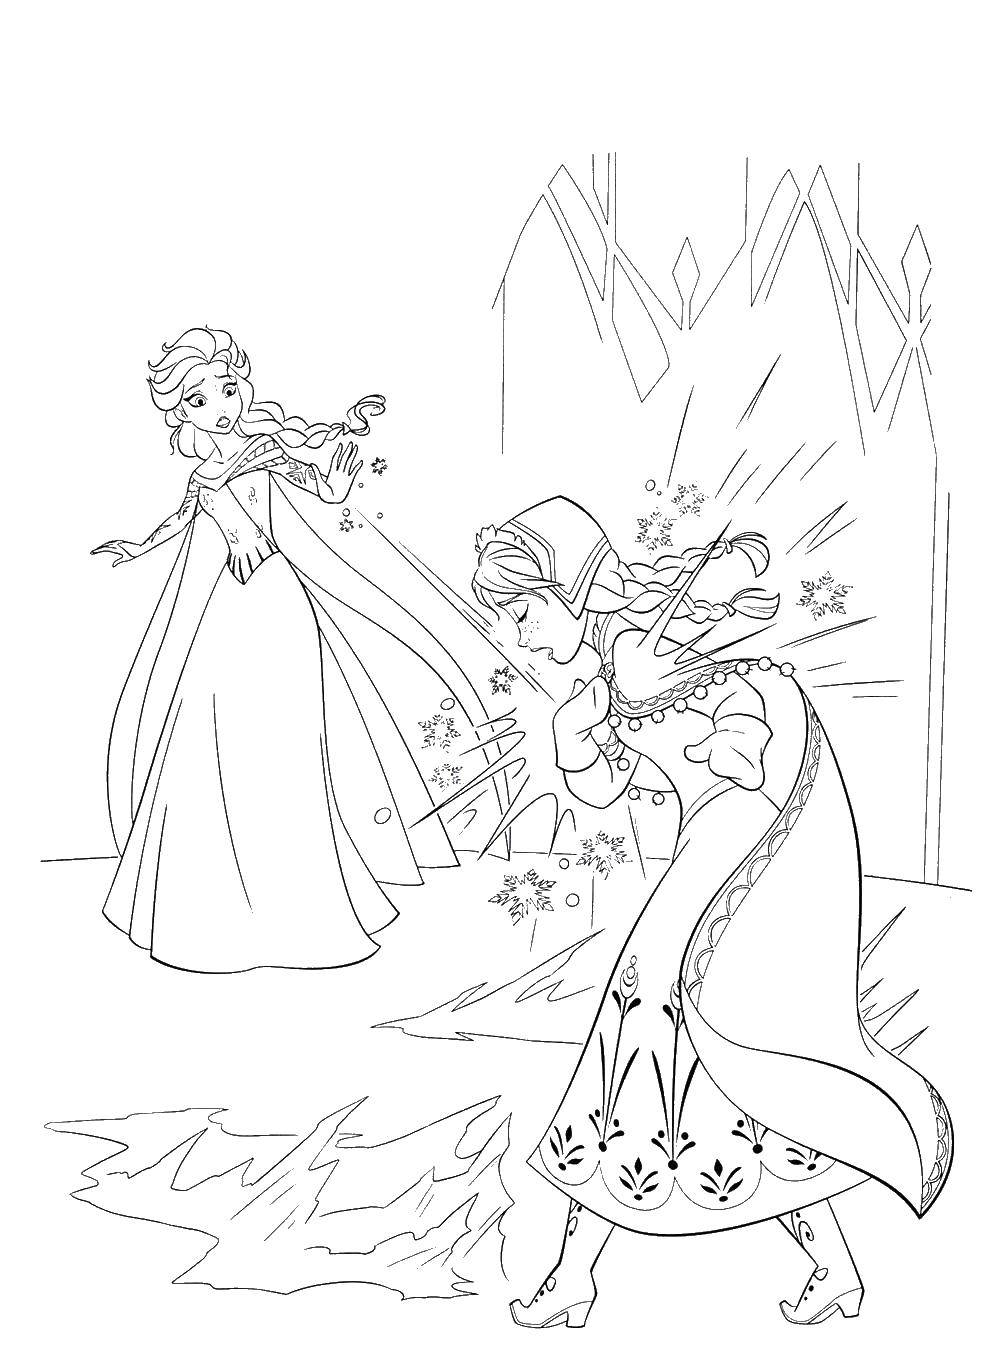 Coloring Elsa struck Anna, holdm. Category coloring cold heart. Tags:  Kristoff, Elsa, Anna, Olaf.